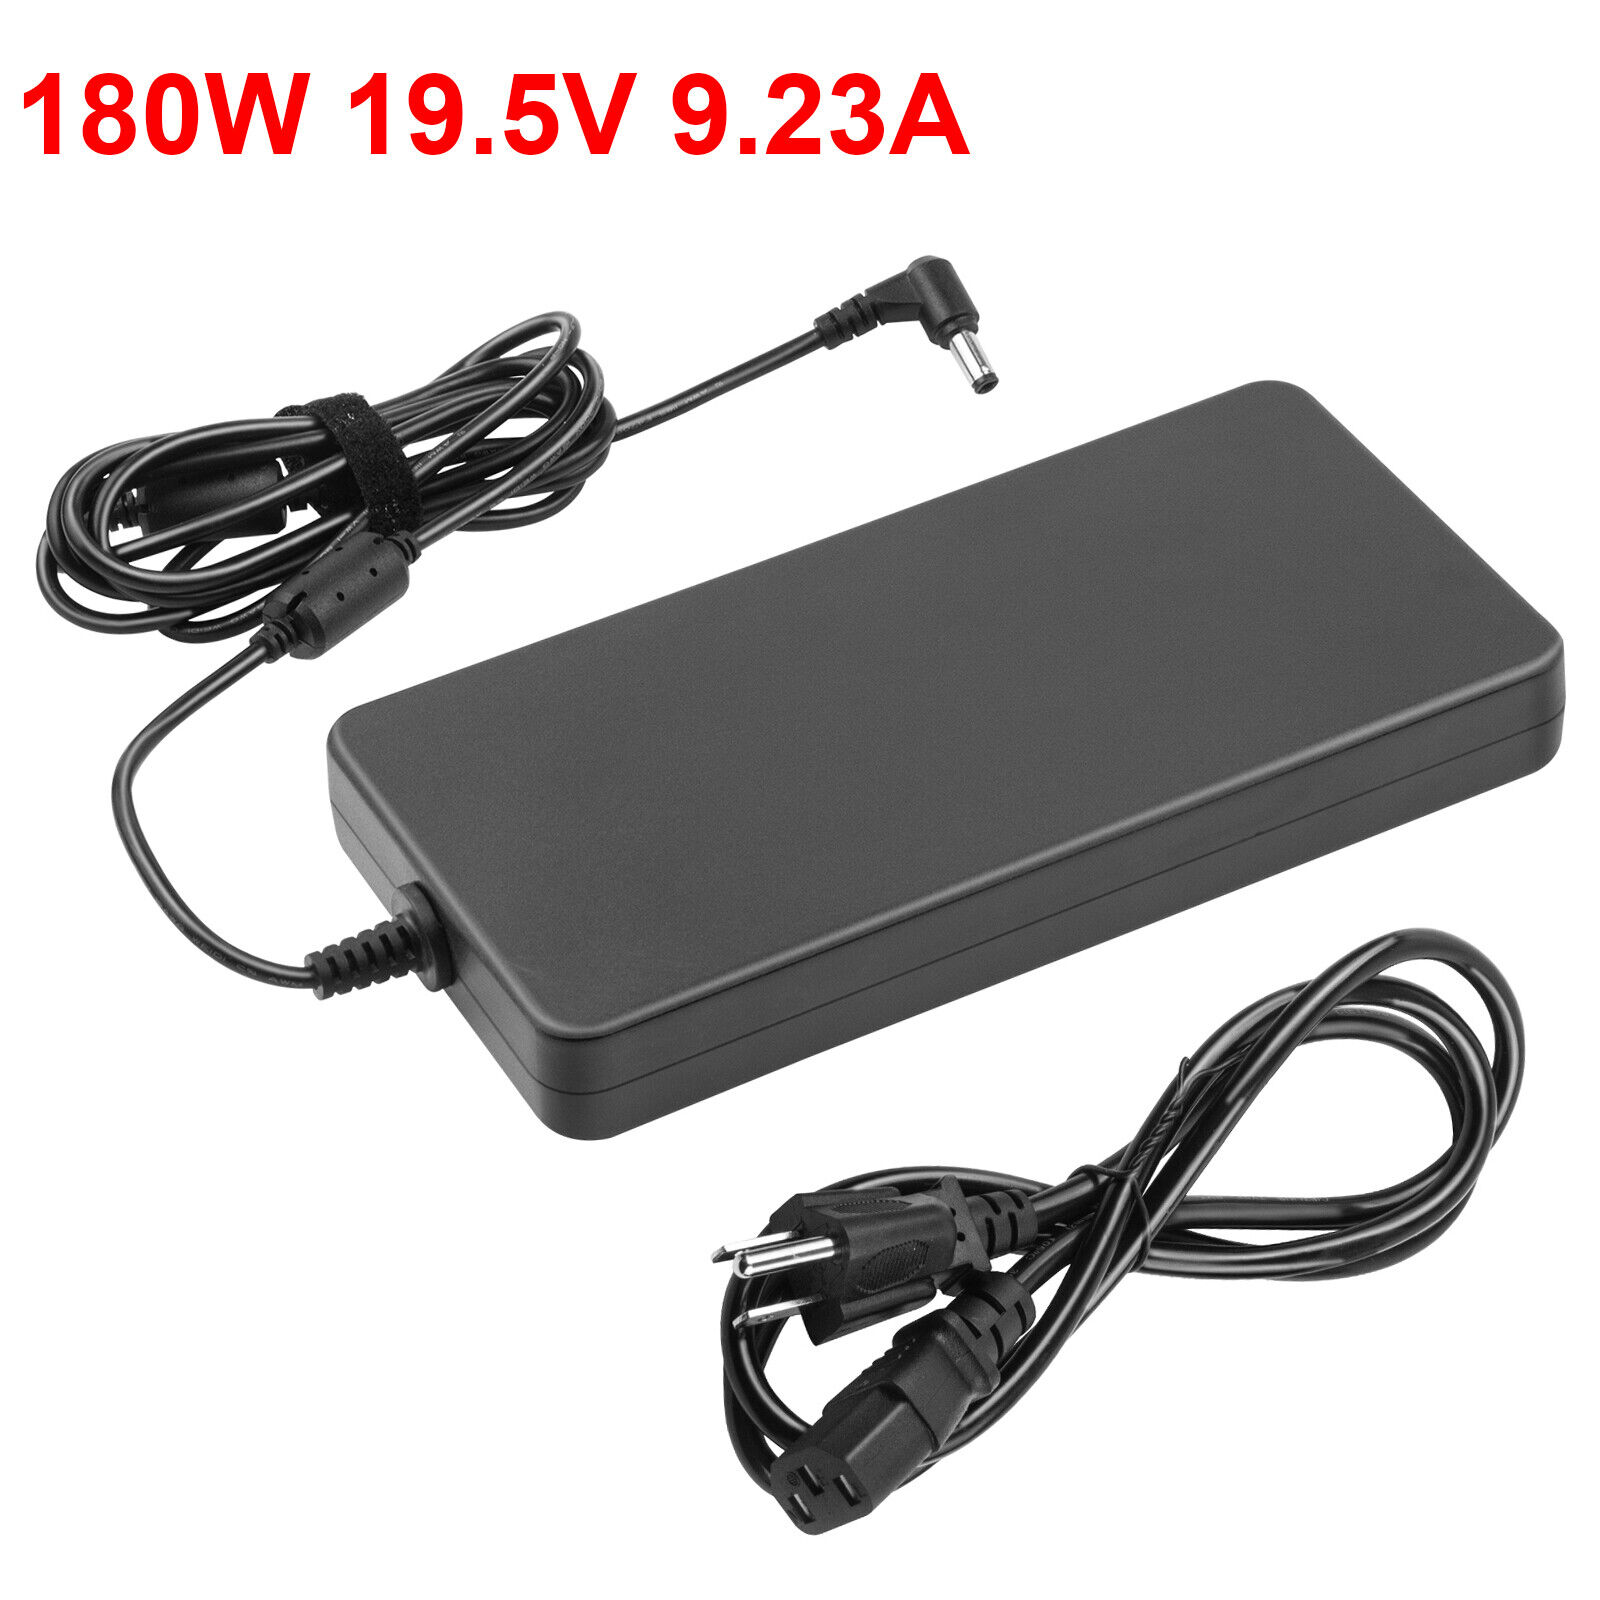 150W/180W/230W Ac Adapter Charger for ASUS ROG Laptop Notebook Power Supply Cord